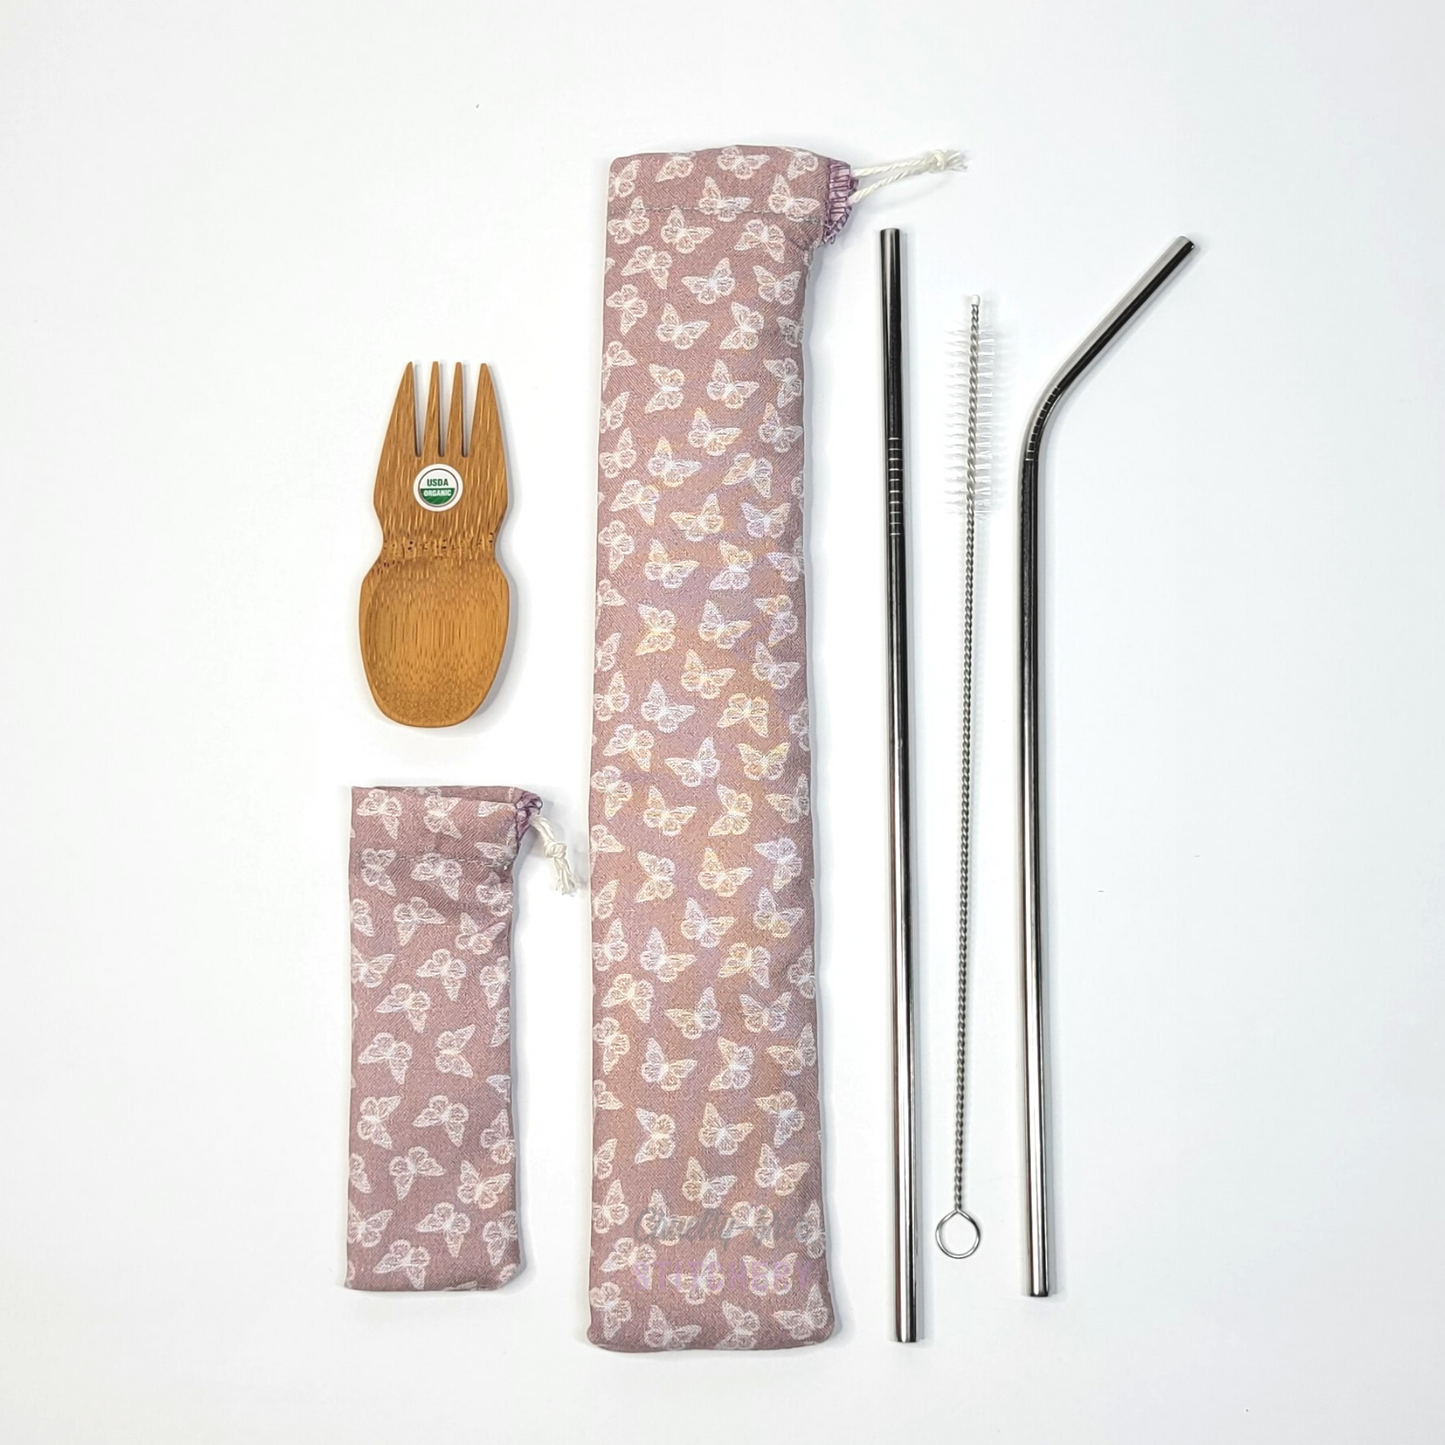 All contents of this bundle. A bamboo spork, mauve butterflies print spork pouch, mauve butterflies print straw pouch, and stainless steel straw set.